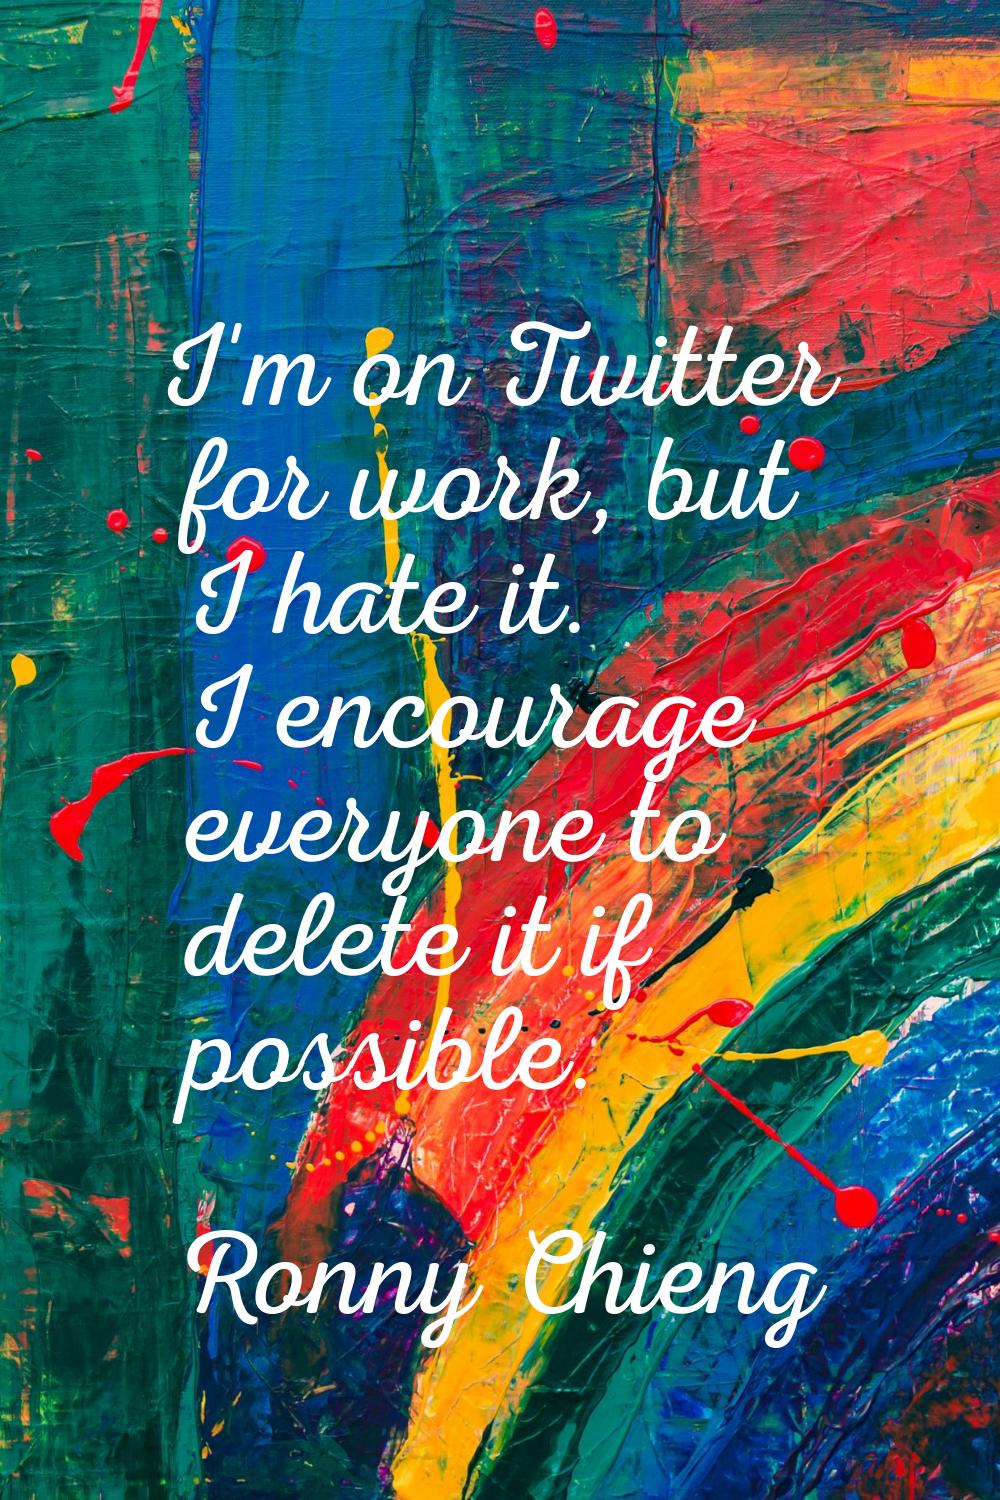 I'm on Twitter for work, but I hate it. I encourage everyone to delete it if possible.